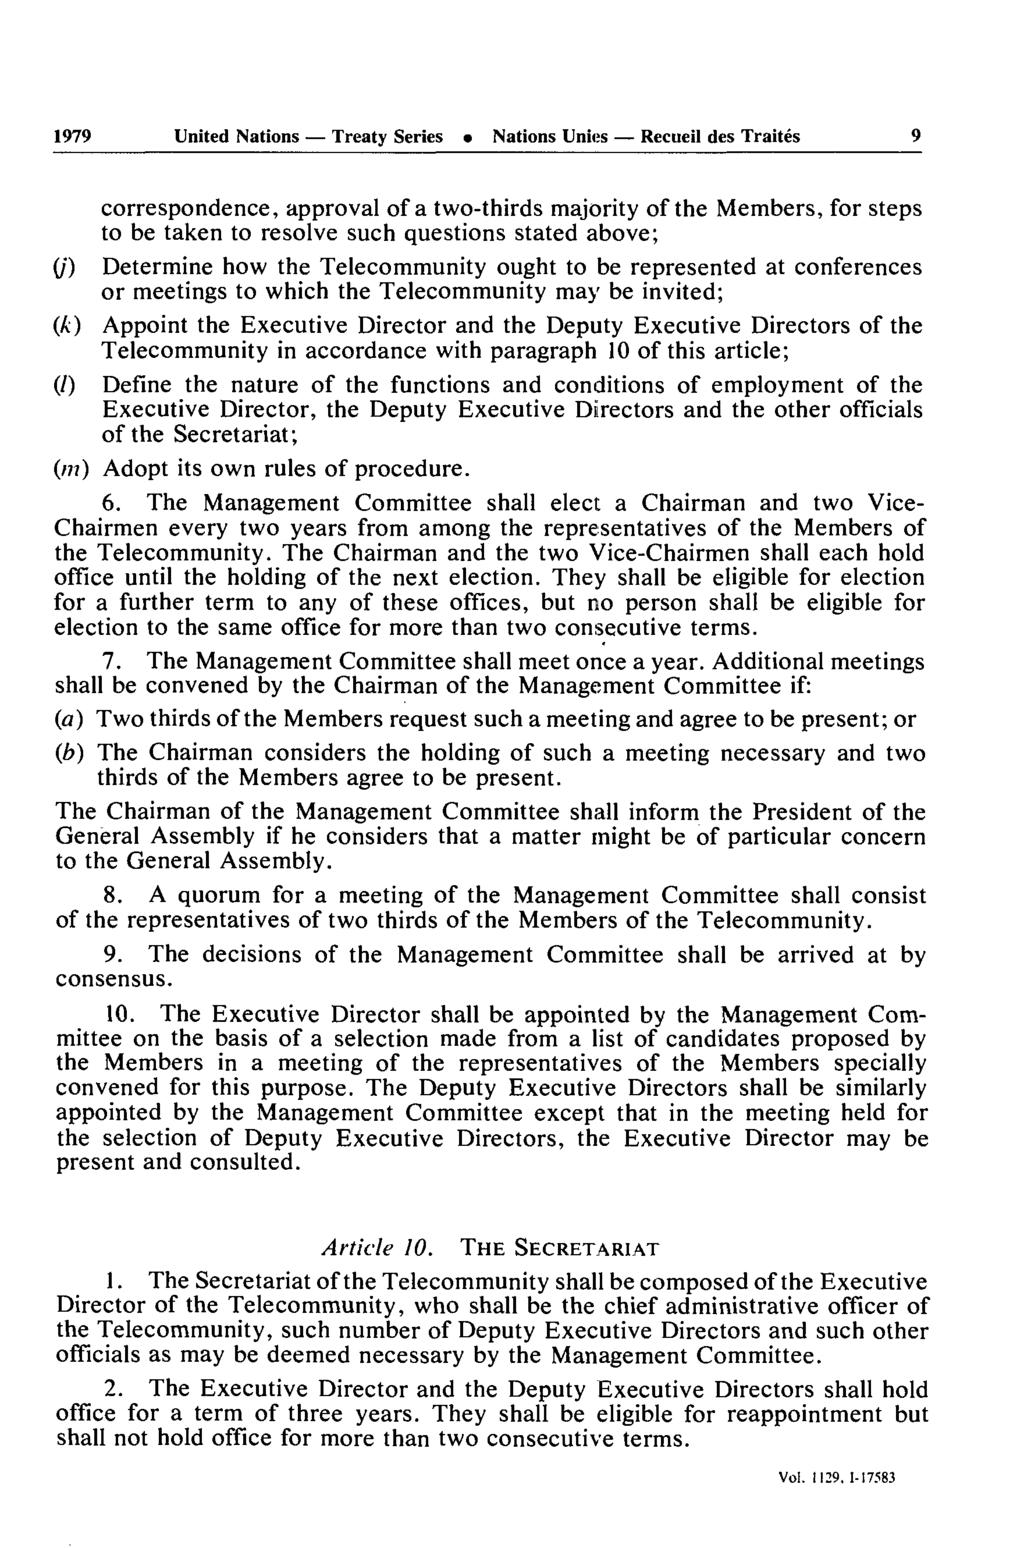 1979 United Nations Treaty Series Nations Unies Recueil des Traités 9 correspondence, approval of a two-thirds majority of the Members, for steps to be taken to resolve such questions stated above;